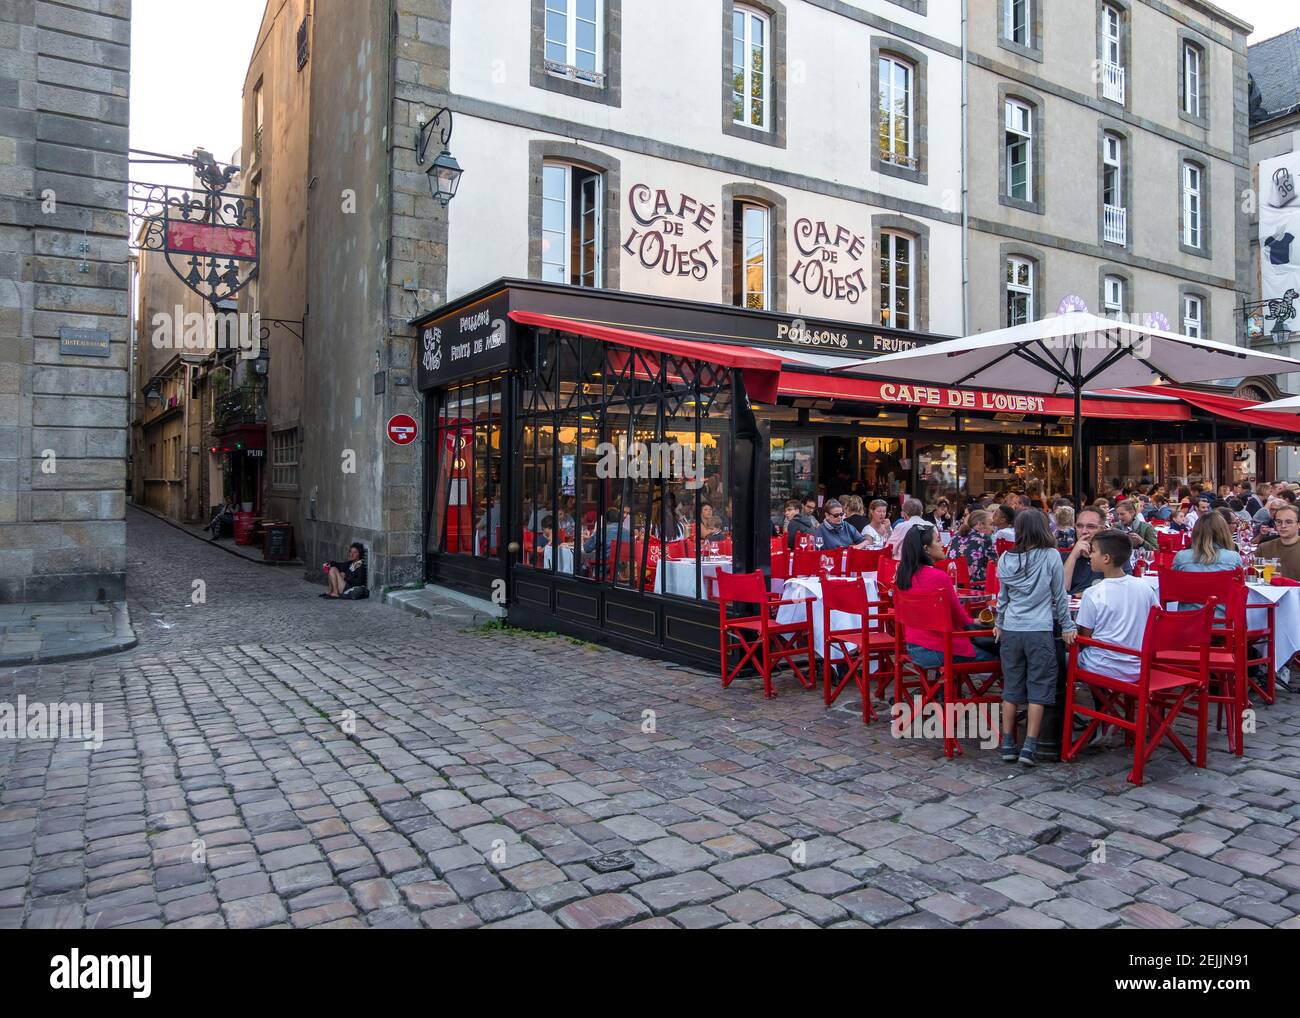 Saint-Malo, France - August 25, 2019: Locals and tourists at the Cafe de l'Ouest at Place Chateaubriand within the walled old town of Saint-Malo in Br Stock Photo